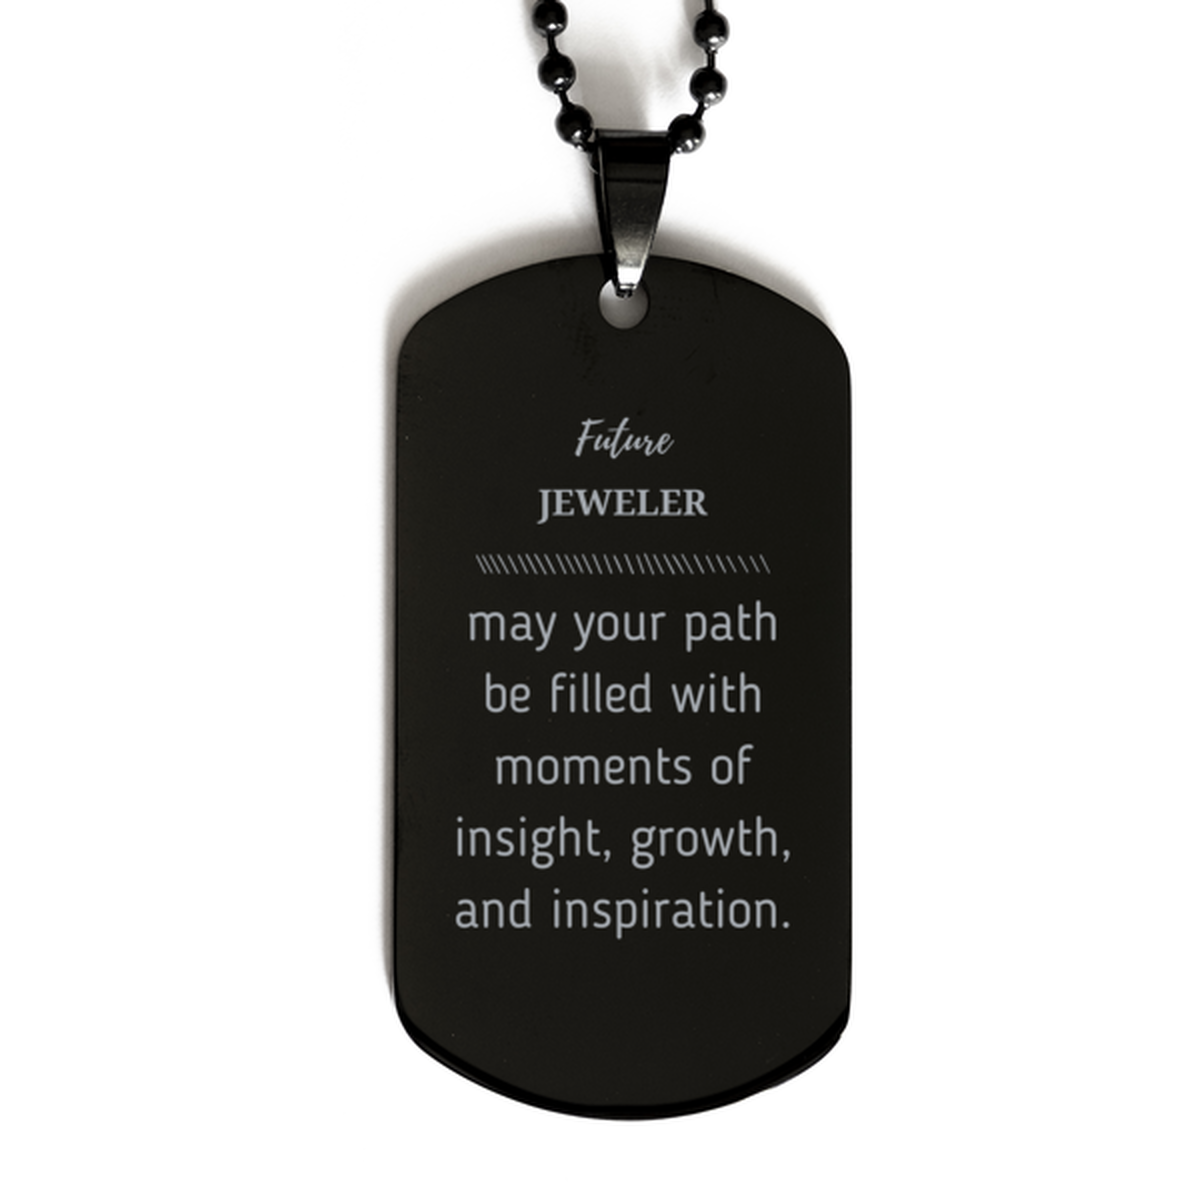 Future Jeweler Gifts, May your path be filled with moments of insight, Graduation Gifts for New Jeweler, Christmas Unique Black Dog Tag For Men, Women, Friends